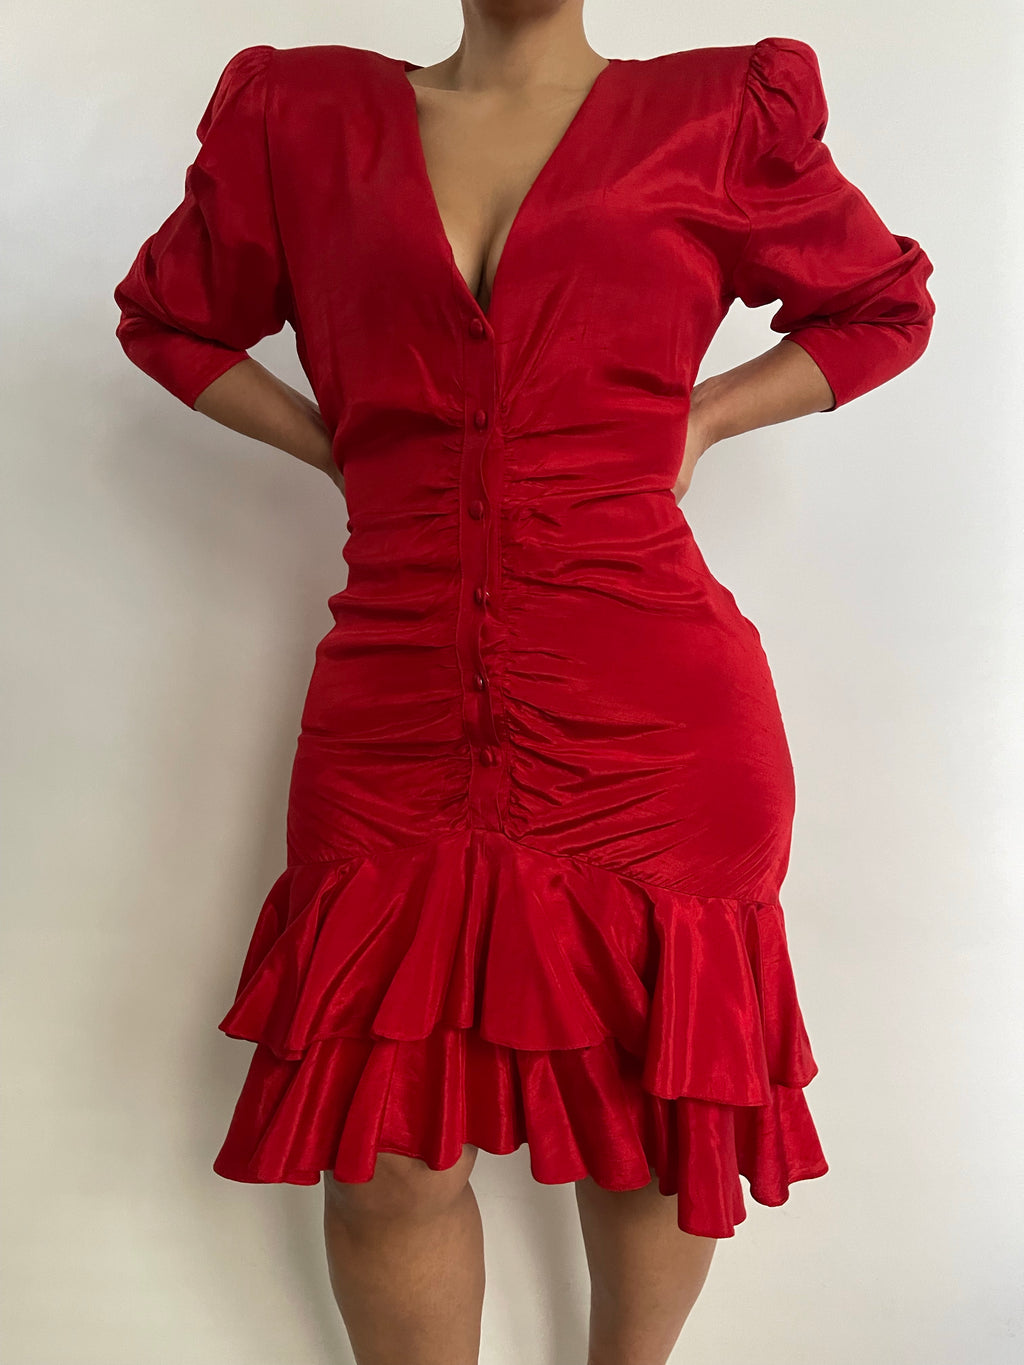 VINTAGE DUPIONI SILK RED LONG SLEEVE RUCHED FRONT DRESS - SIZE M